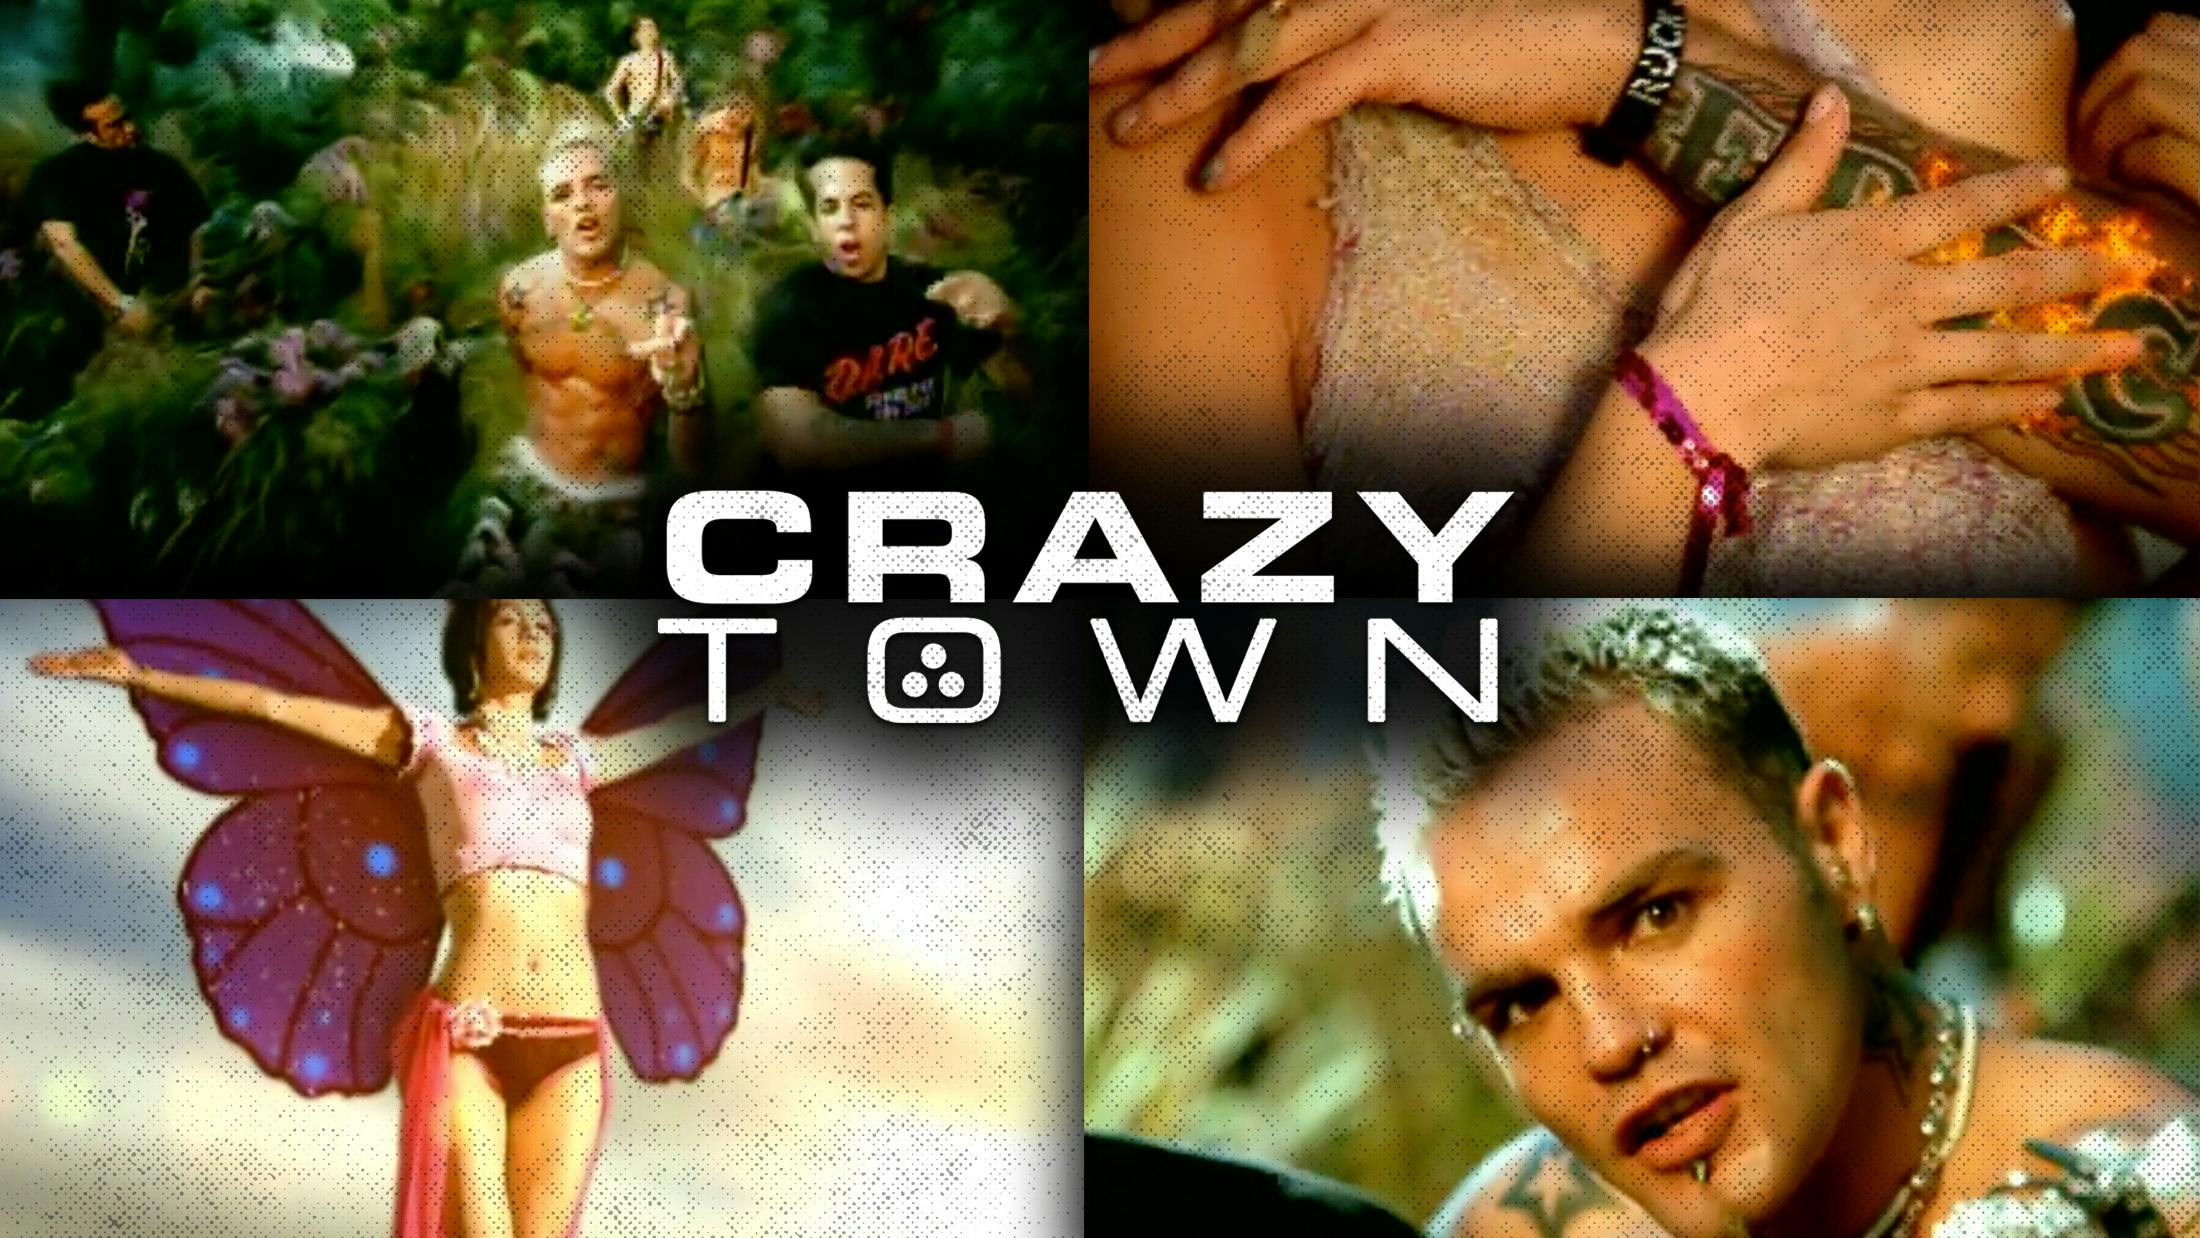 A Deep Dive Into The Music Video For Crazy Town’s Butterfly